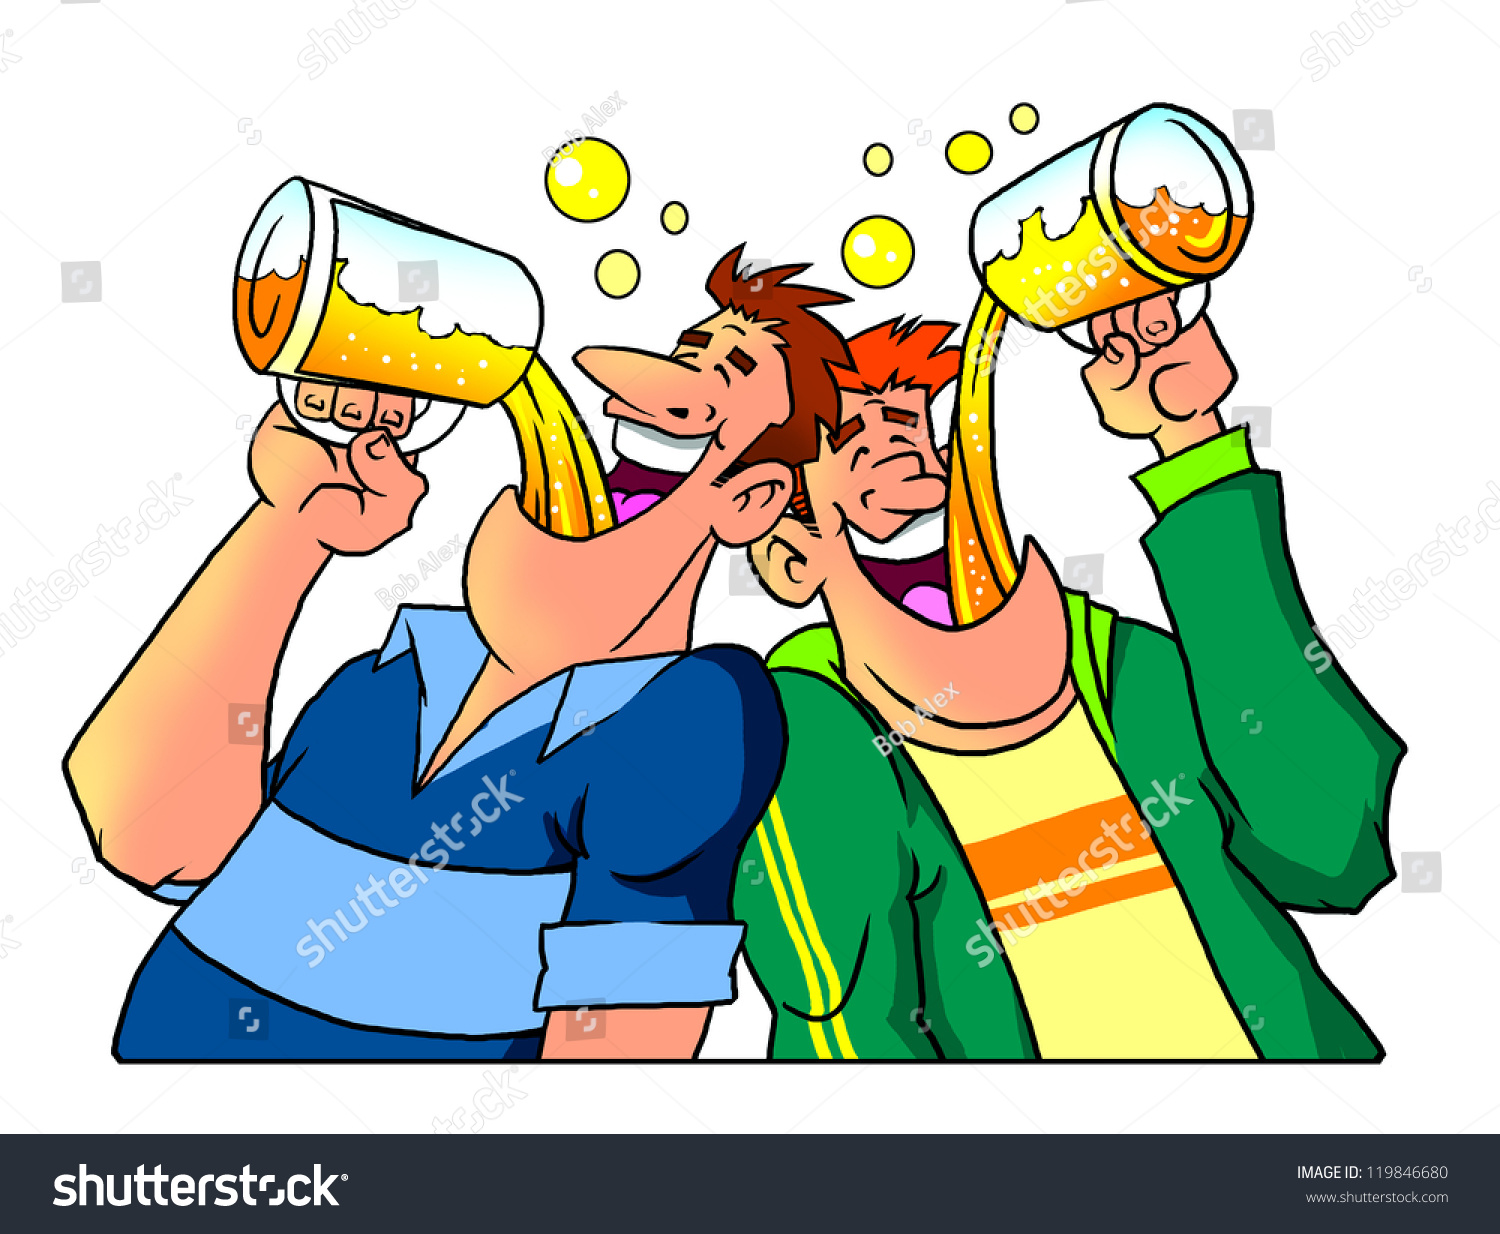 funny drunk clipart - photo #19